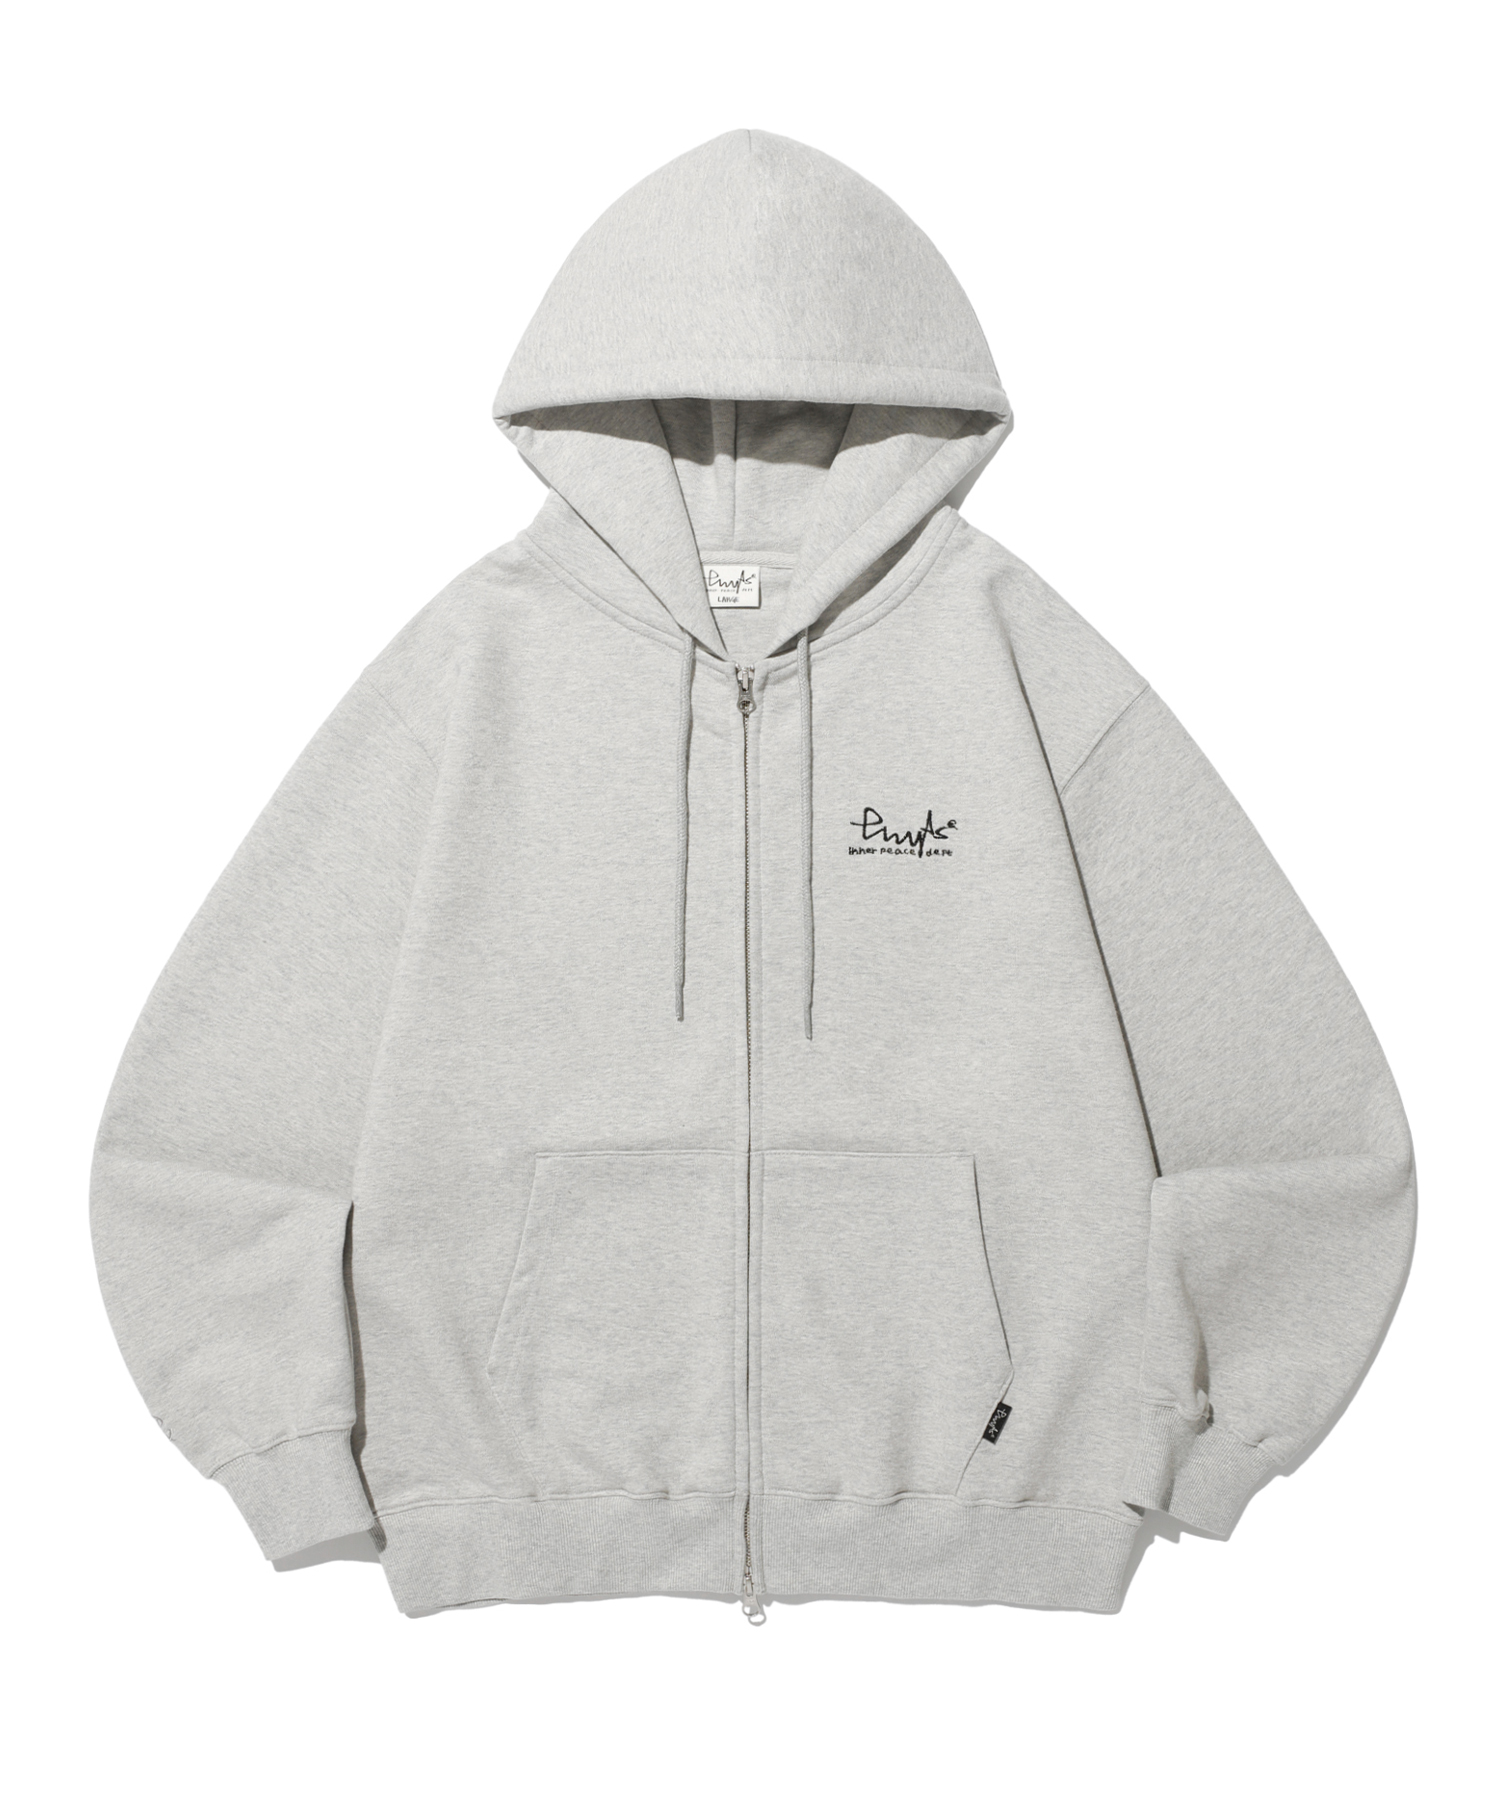 PHYPS® SMALL SIGN LOGO HOODIE ZIP UP GRAY